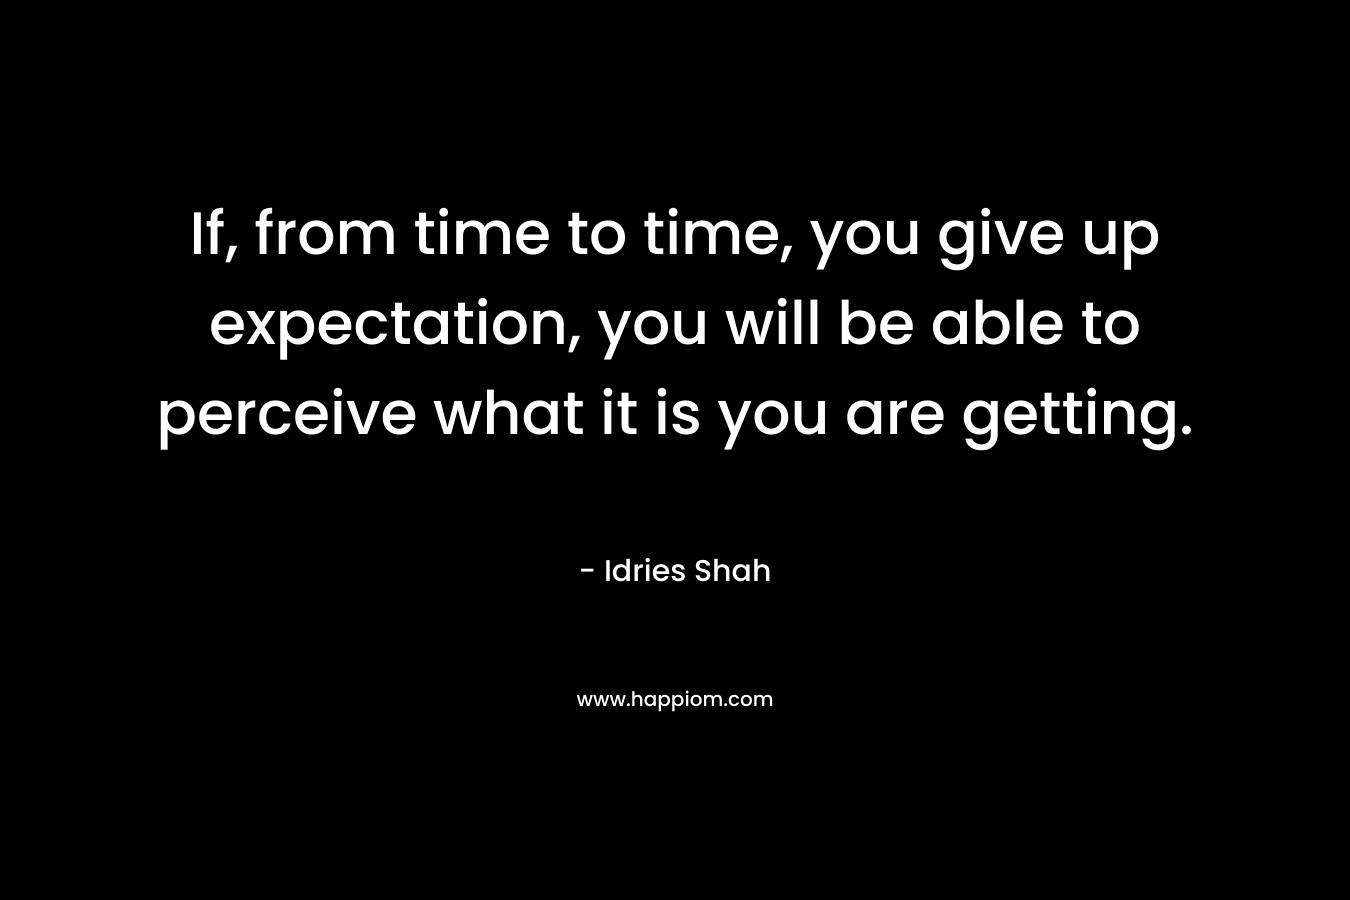 If, from time to time, you give up expectation, you will be able to perceive what it is you are getting. – Idries Shah